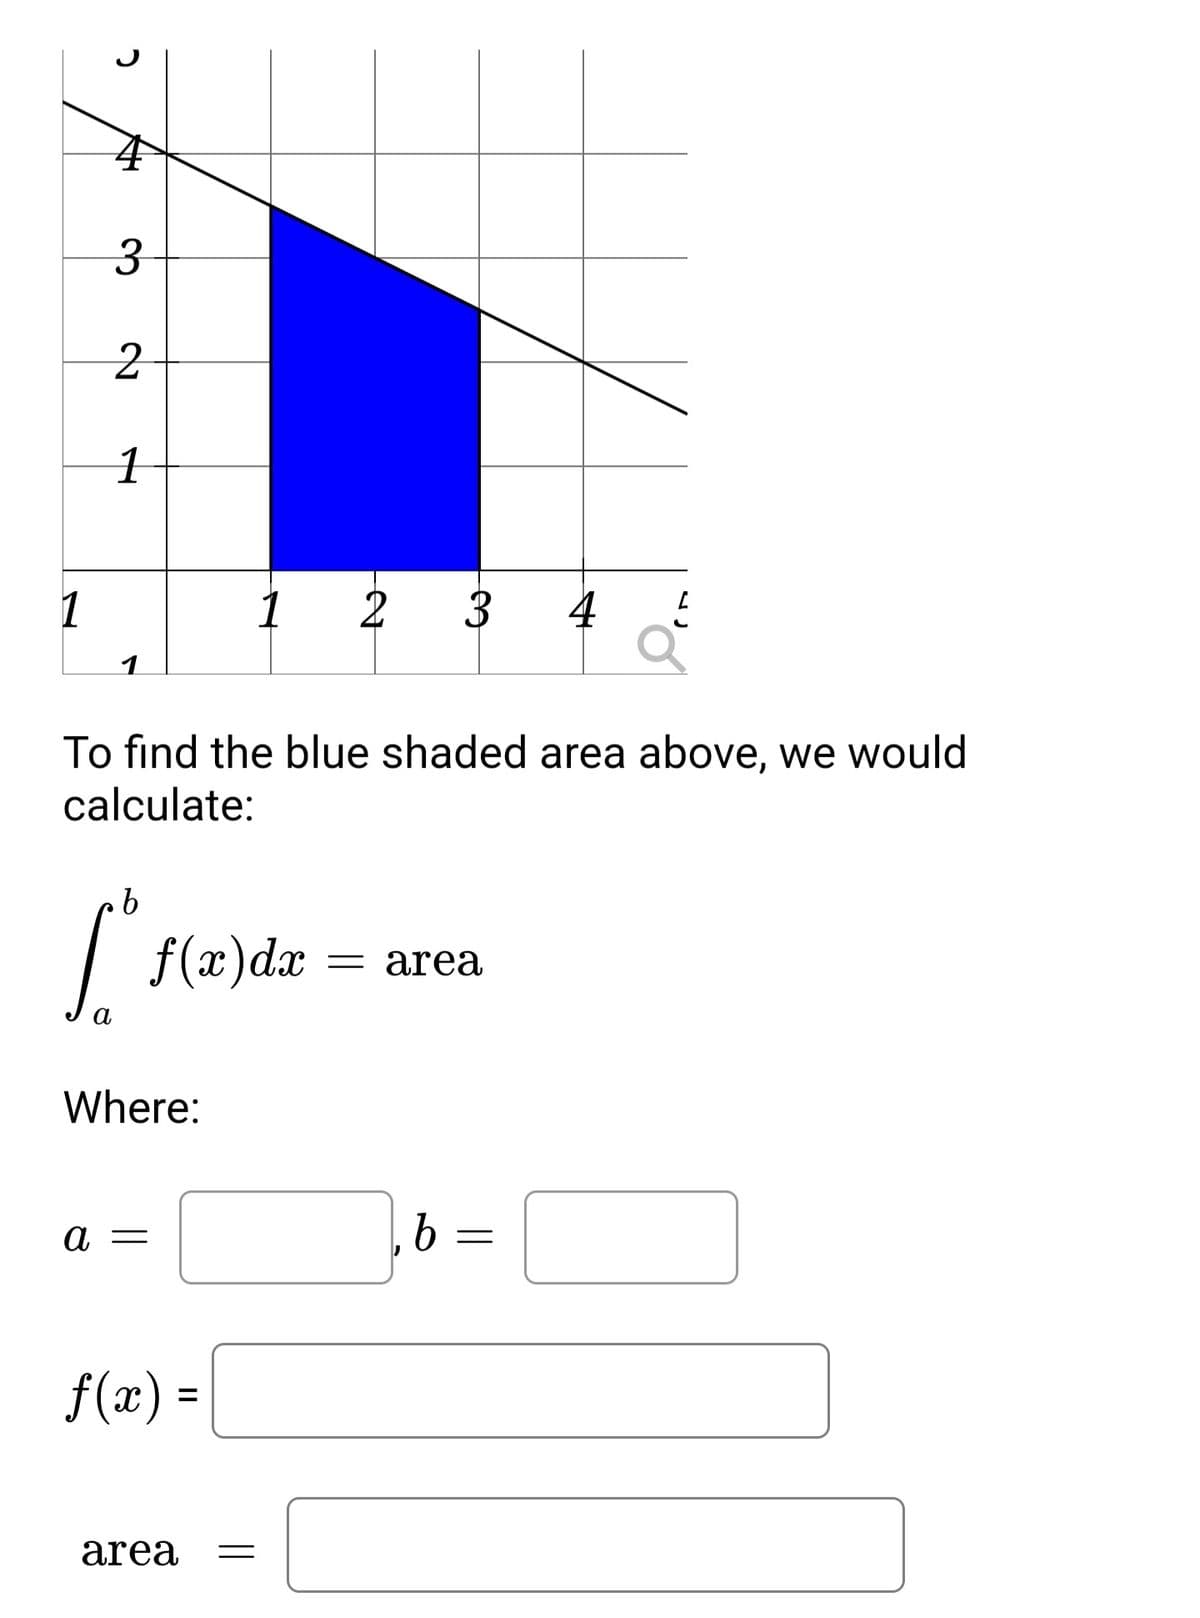 3.
1
1
1
2
3
4
1
To find the blue shaded area above, we would
calculate:
| f(x)de
= area
а
Where:
а —
b :
f(x) =
area
